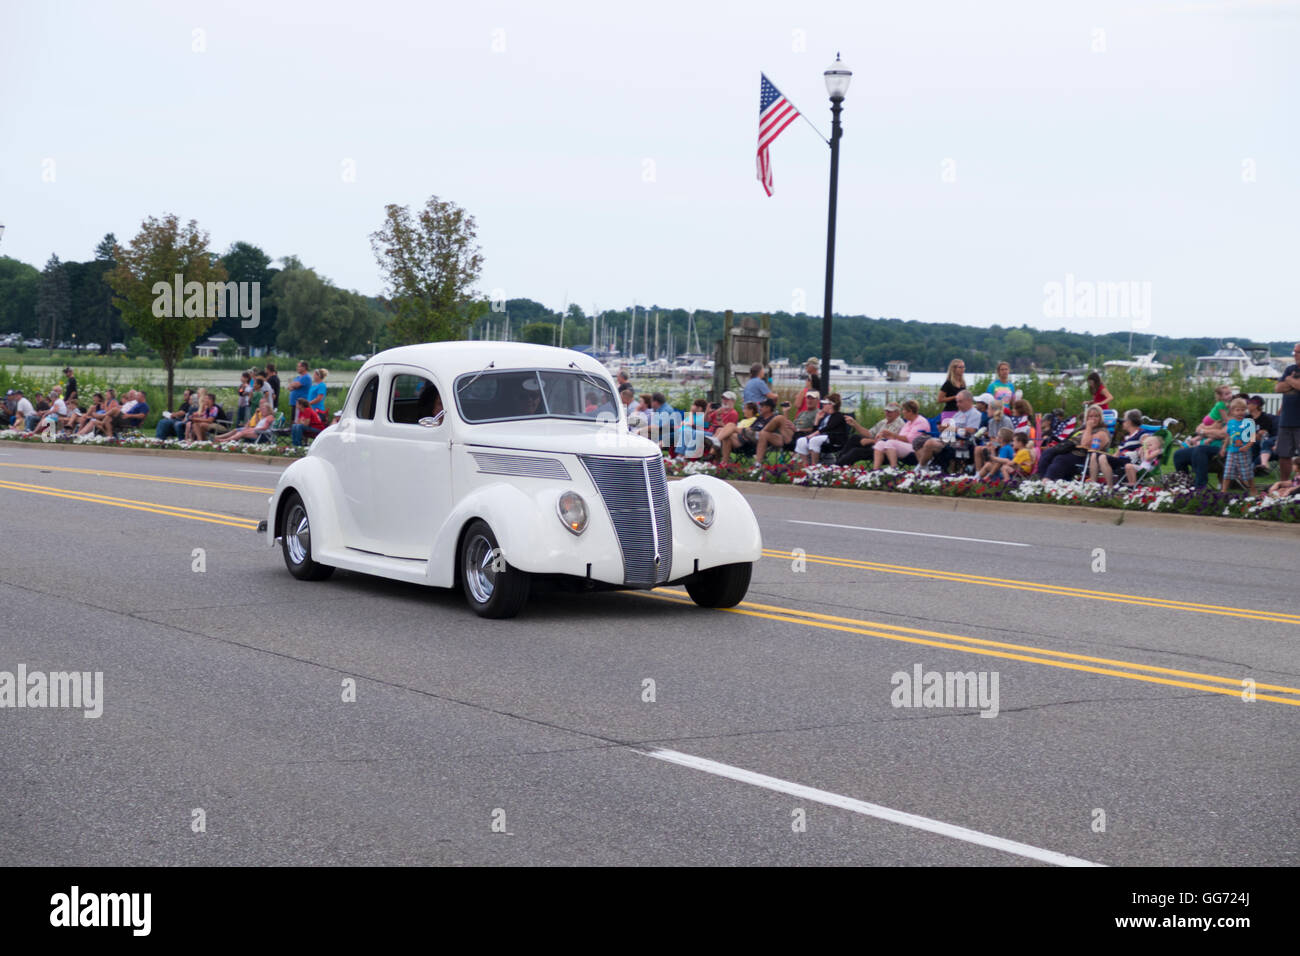 A vintage Chevrolet 2-door coupe participates in the 2016 Annual Cruz In Parade through Whitehall and Montague, Michigan. Stock Photo